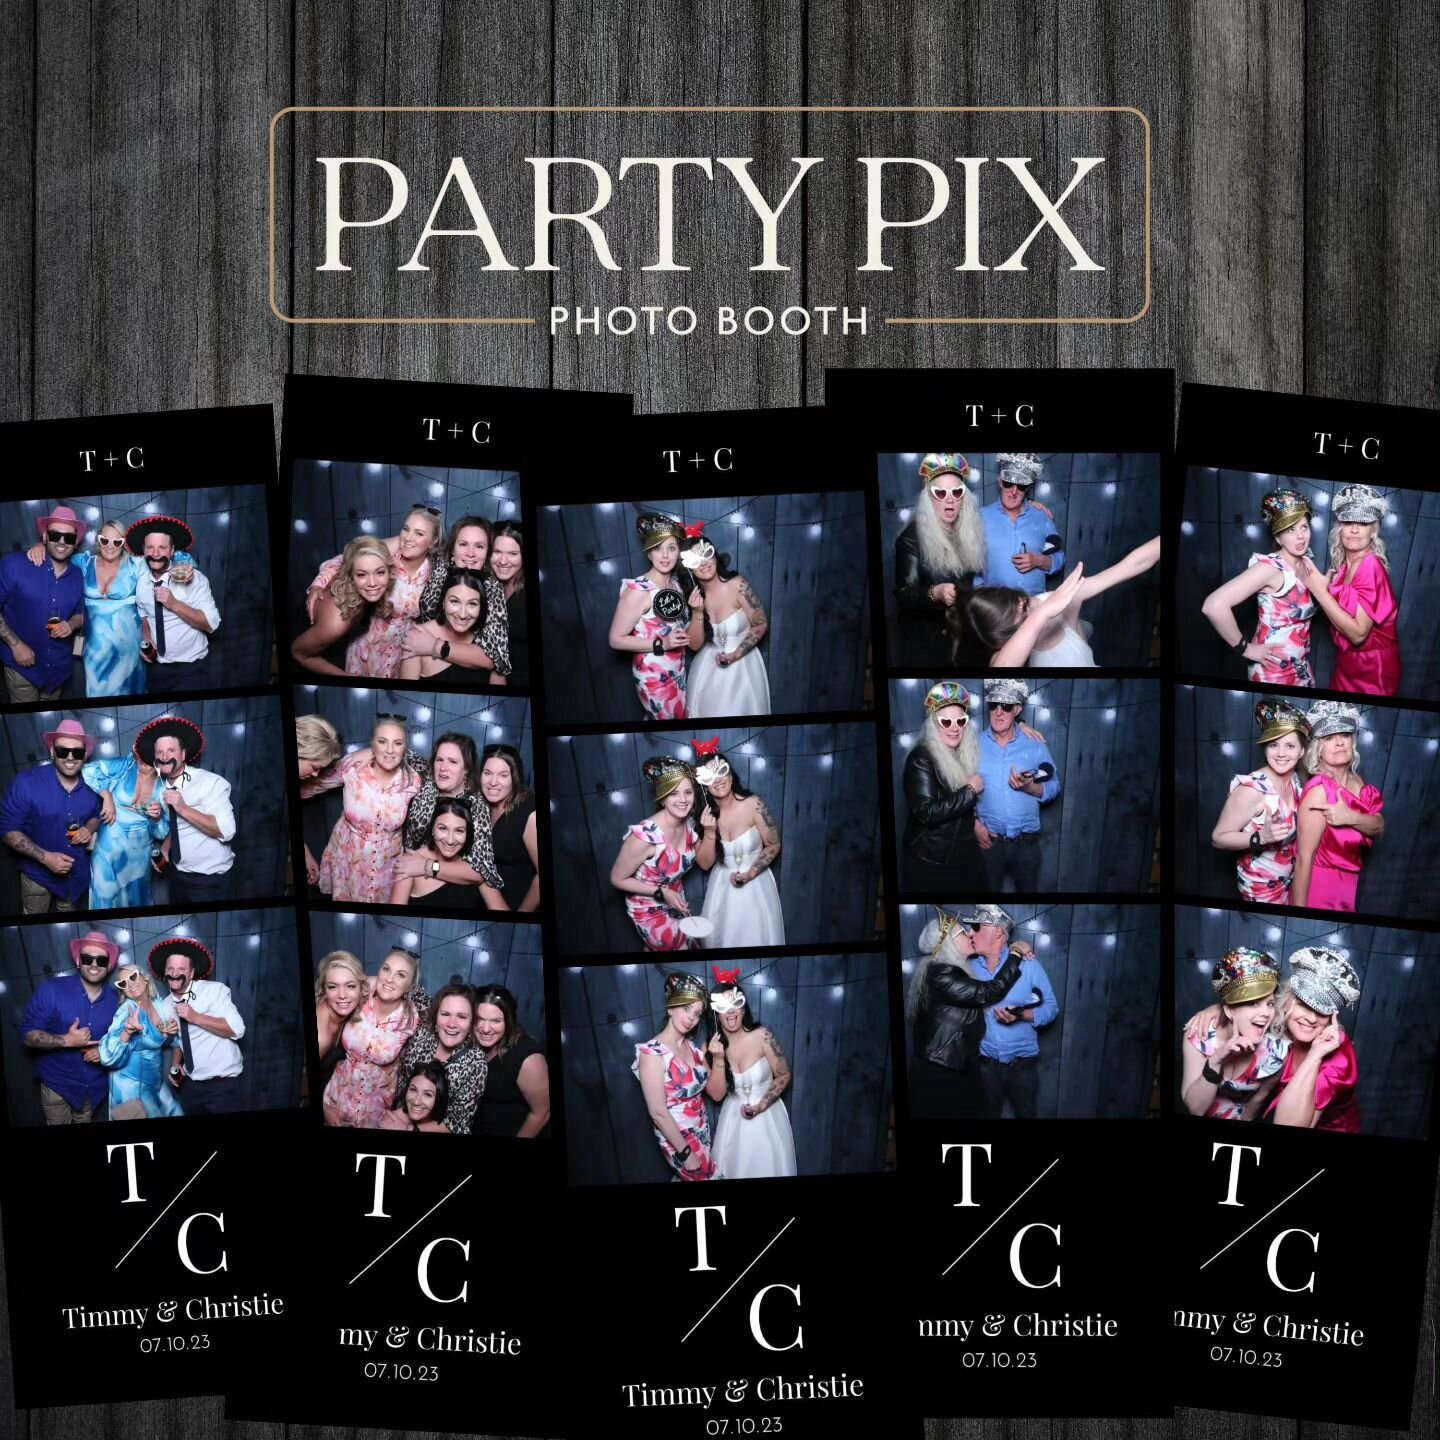 Congrats Timmy &amp; Christie!

#PartyPixPhotoboothMelbourne
#WeddingPhotobooth
#PhotoboothMelbourne
#photostrips

For more info and pricing - https://partypix.com.au